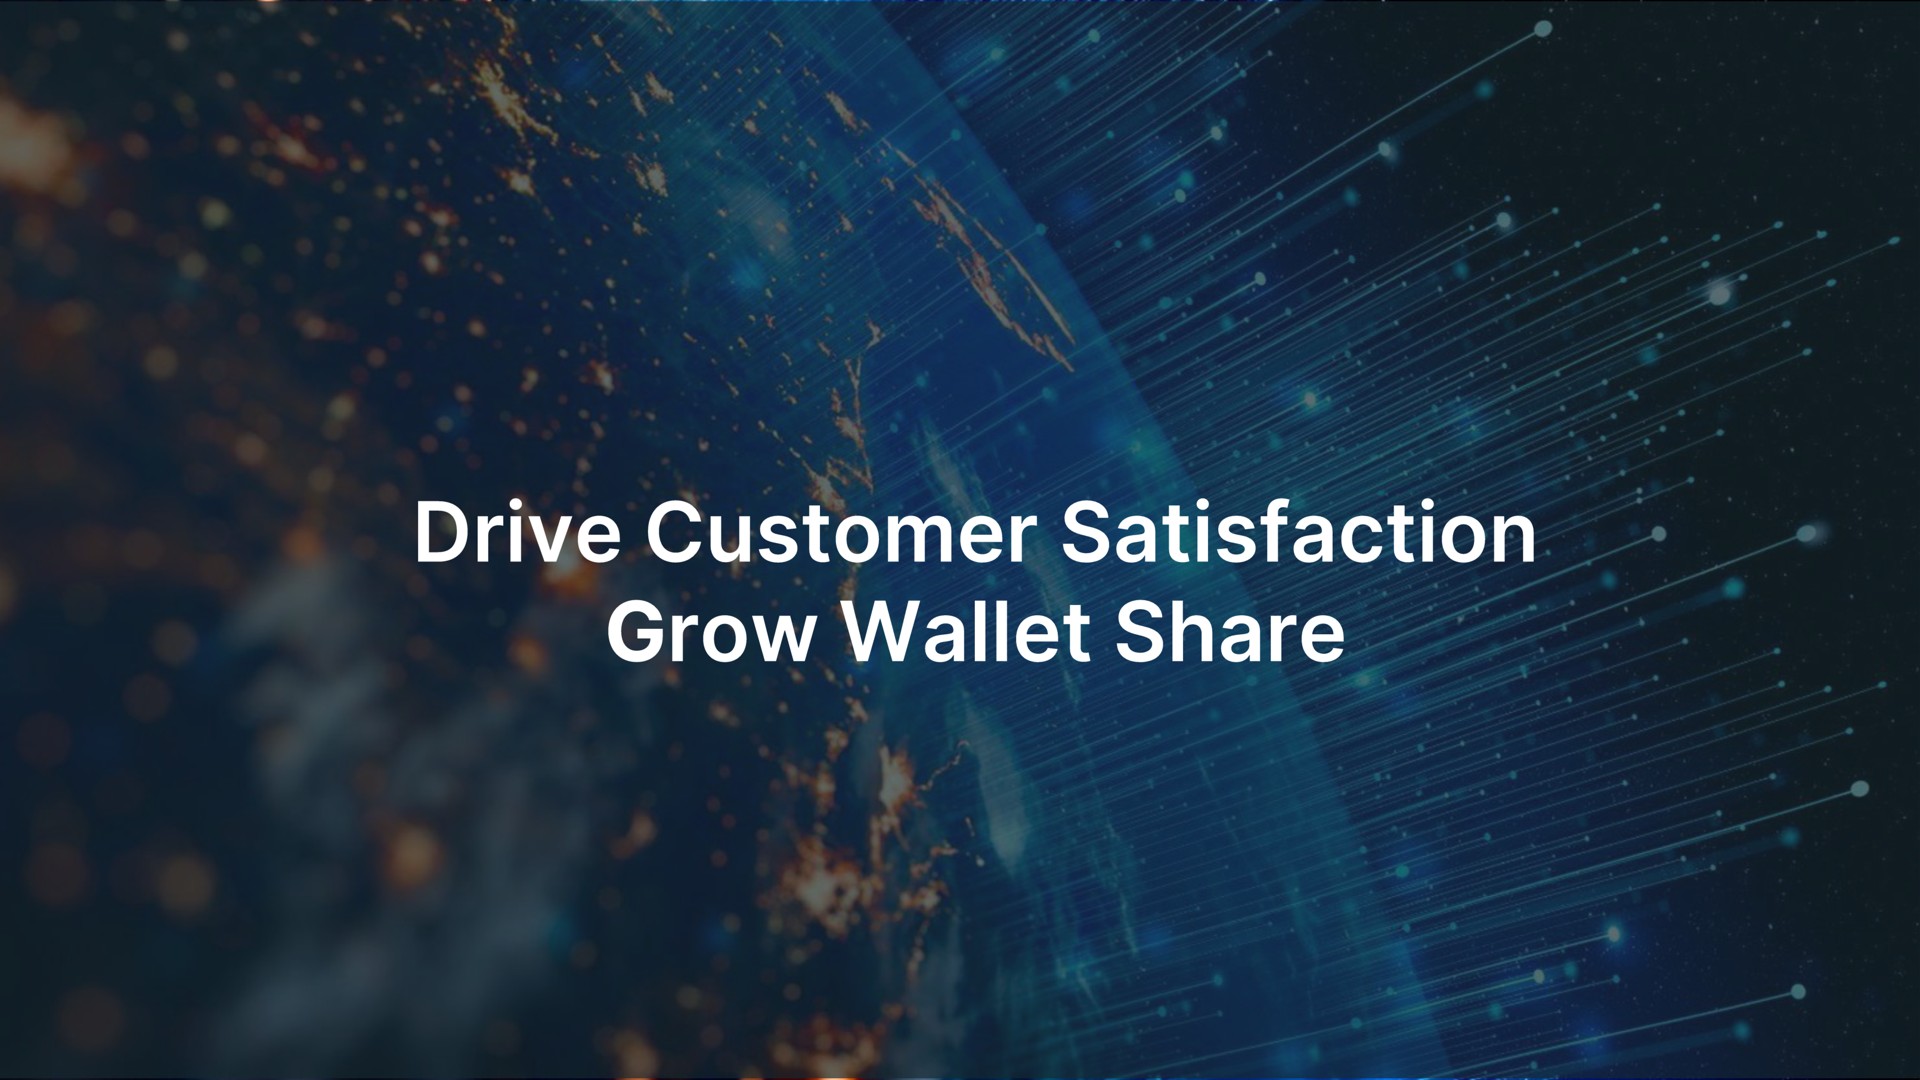 drive customer satisfaction grow wallet share | Fastly